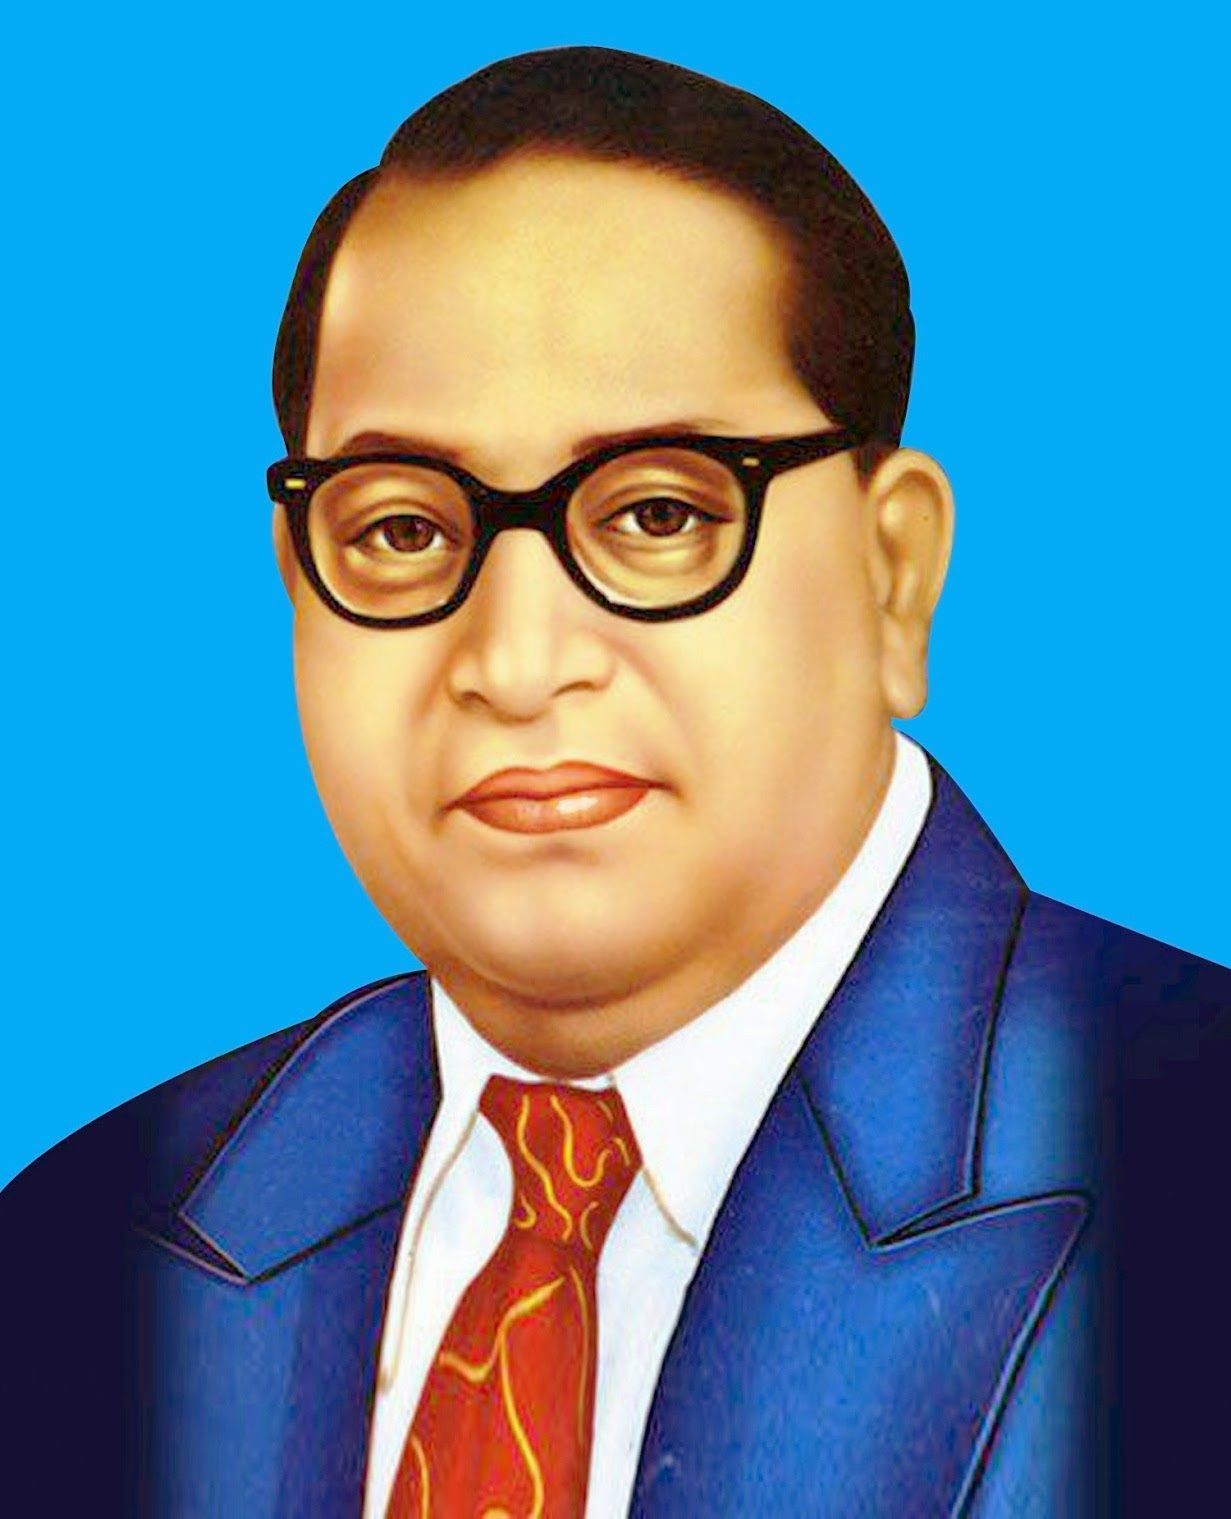 Image result for ambedkar image. Indian freedom fighters, Photo